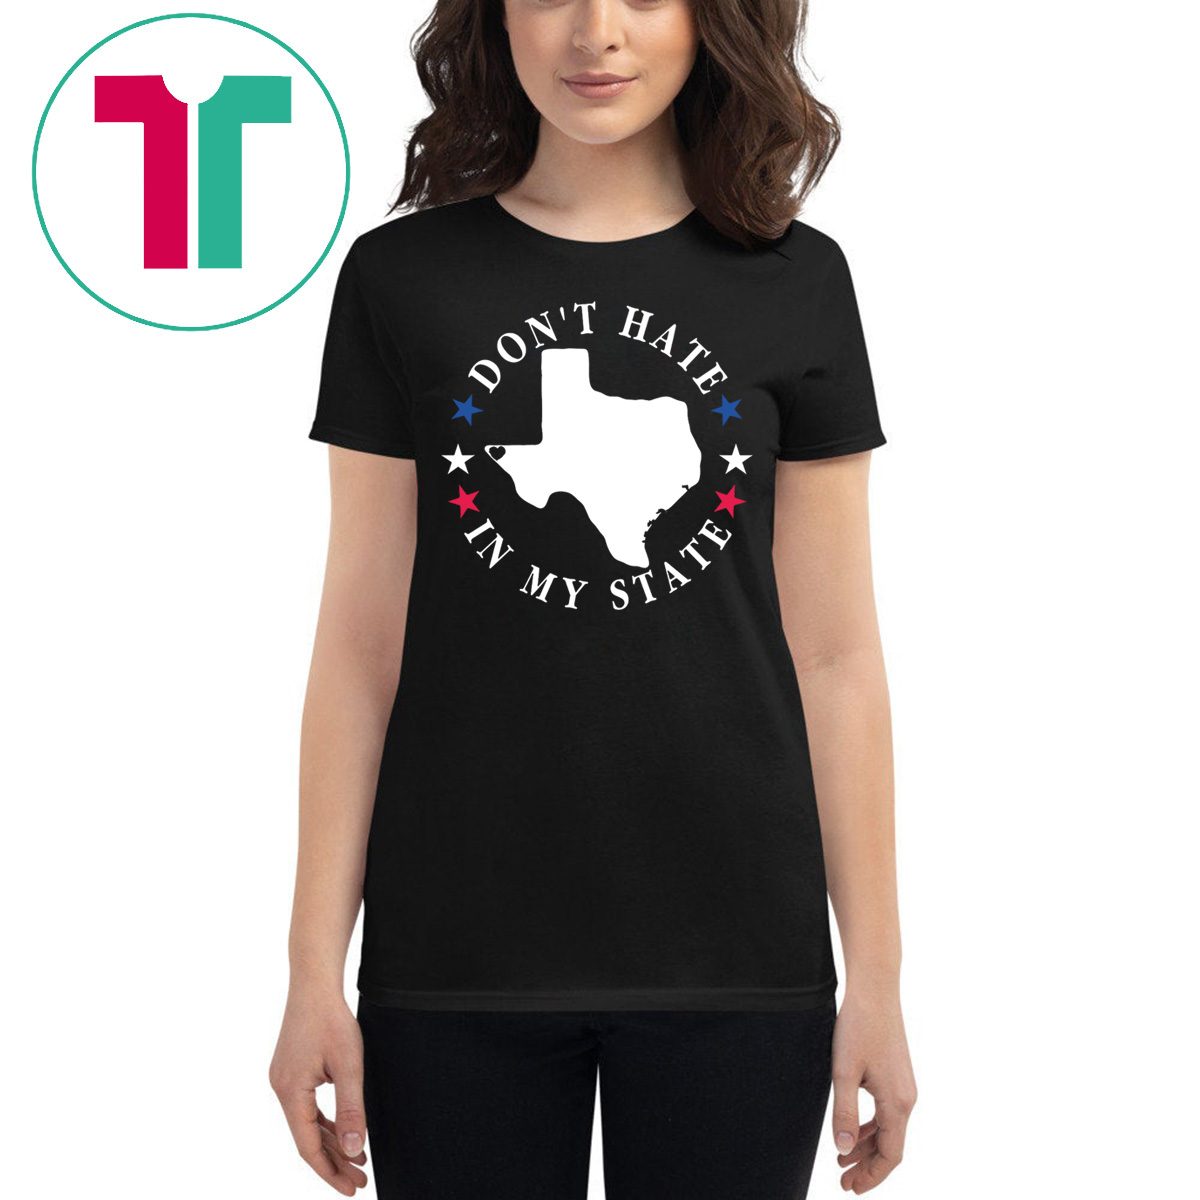 Don't Hate In My State Texas El Paso T-Shirt #ElPasoStrong - OrderQuilt.com